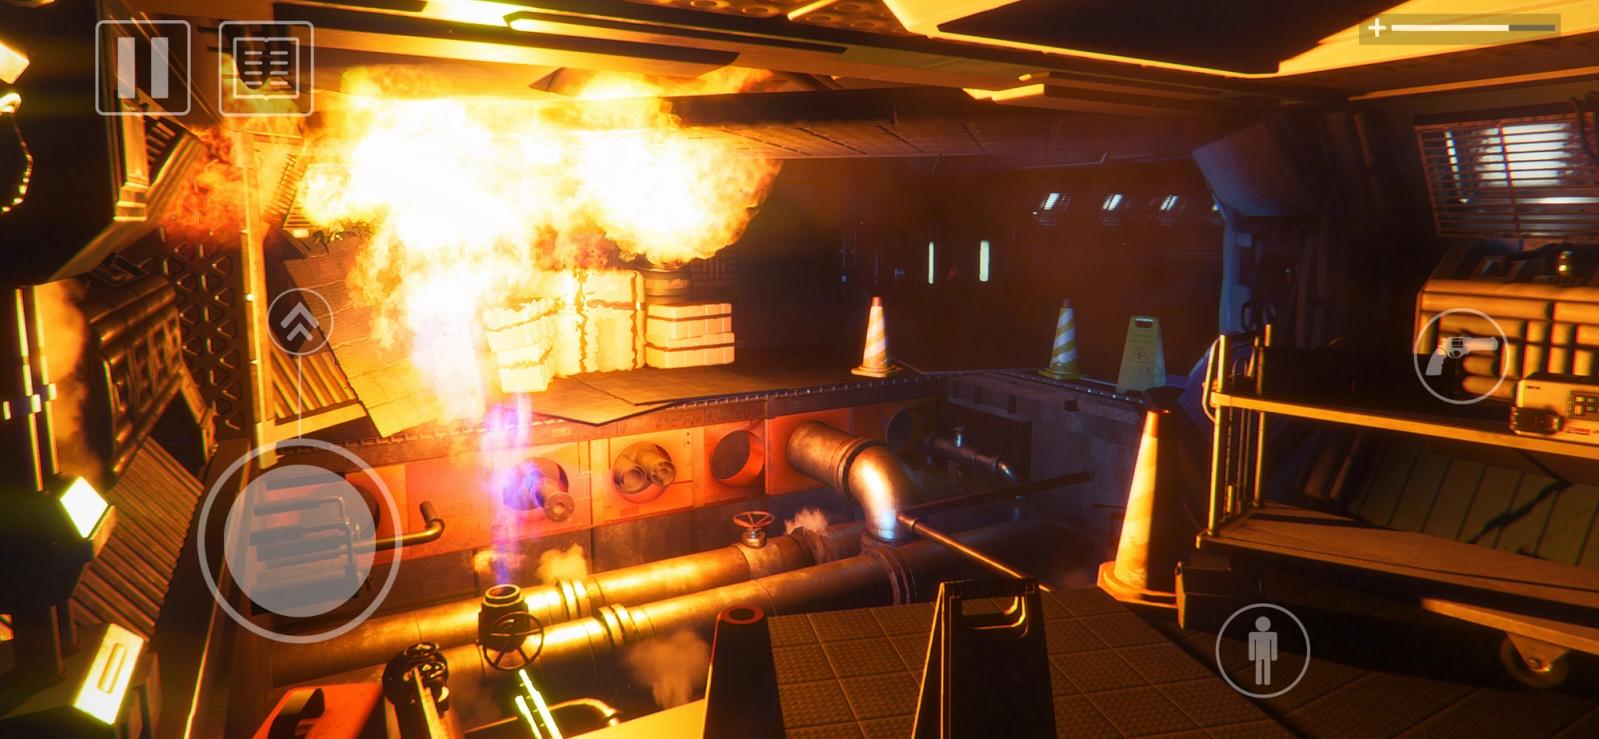 A fire coming out of a pipe in Alien: Isolation.